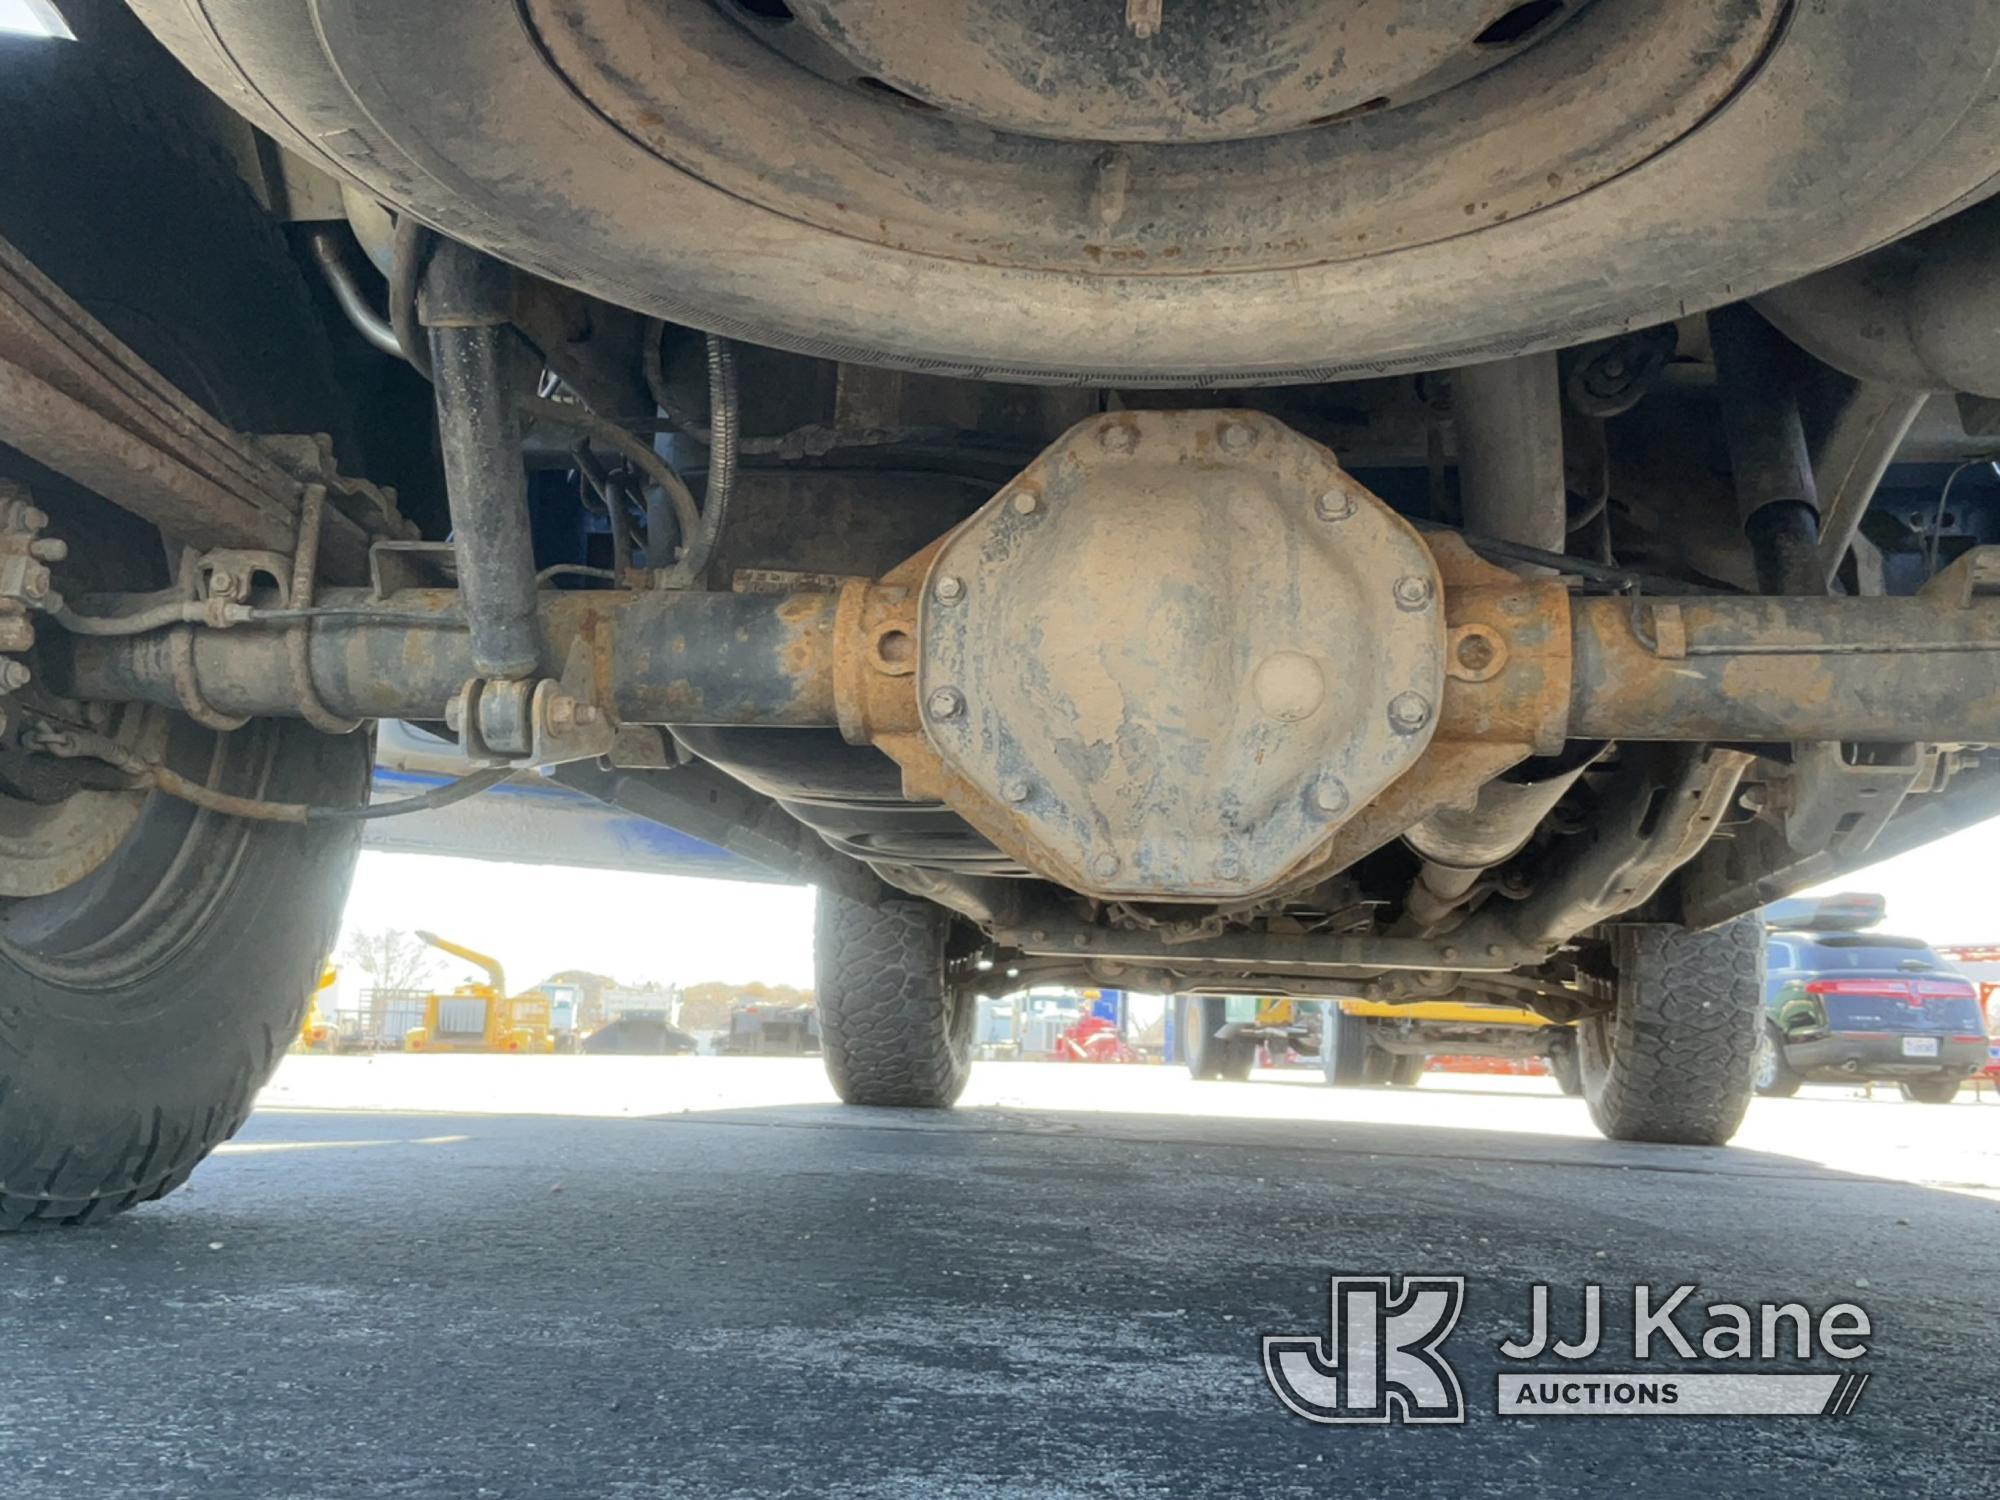 (Salt Lake City, UT) 2008 Dodge 1500 4x4 Crew-Cab Pickup Truck Drive Line Removed, Bad Ball Joints a